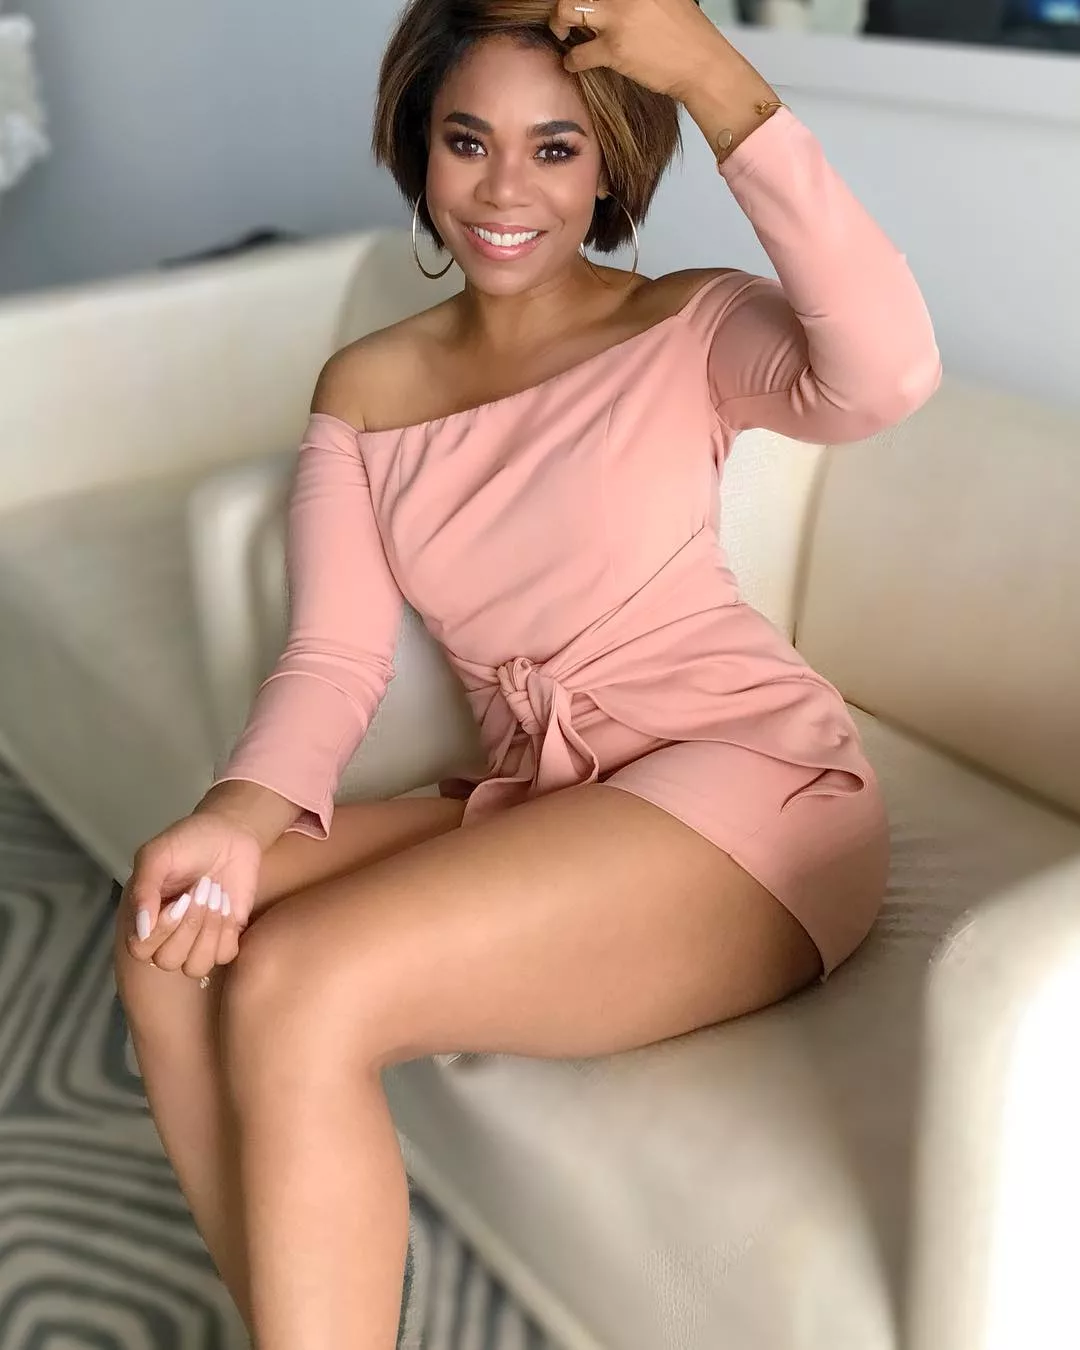 Regina hall naked pictures